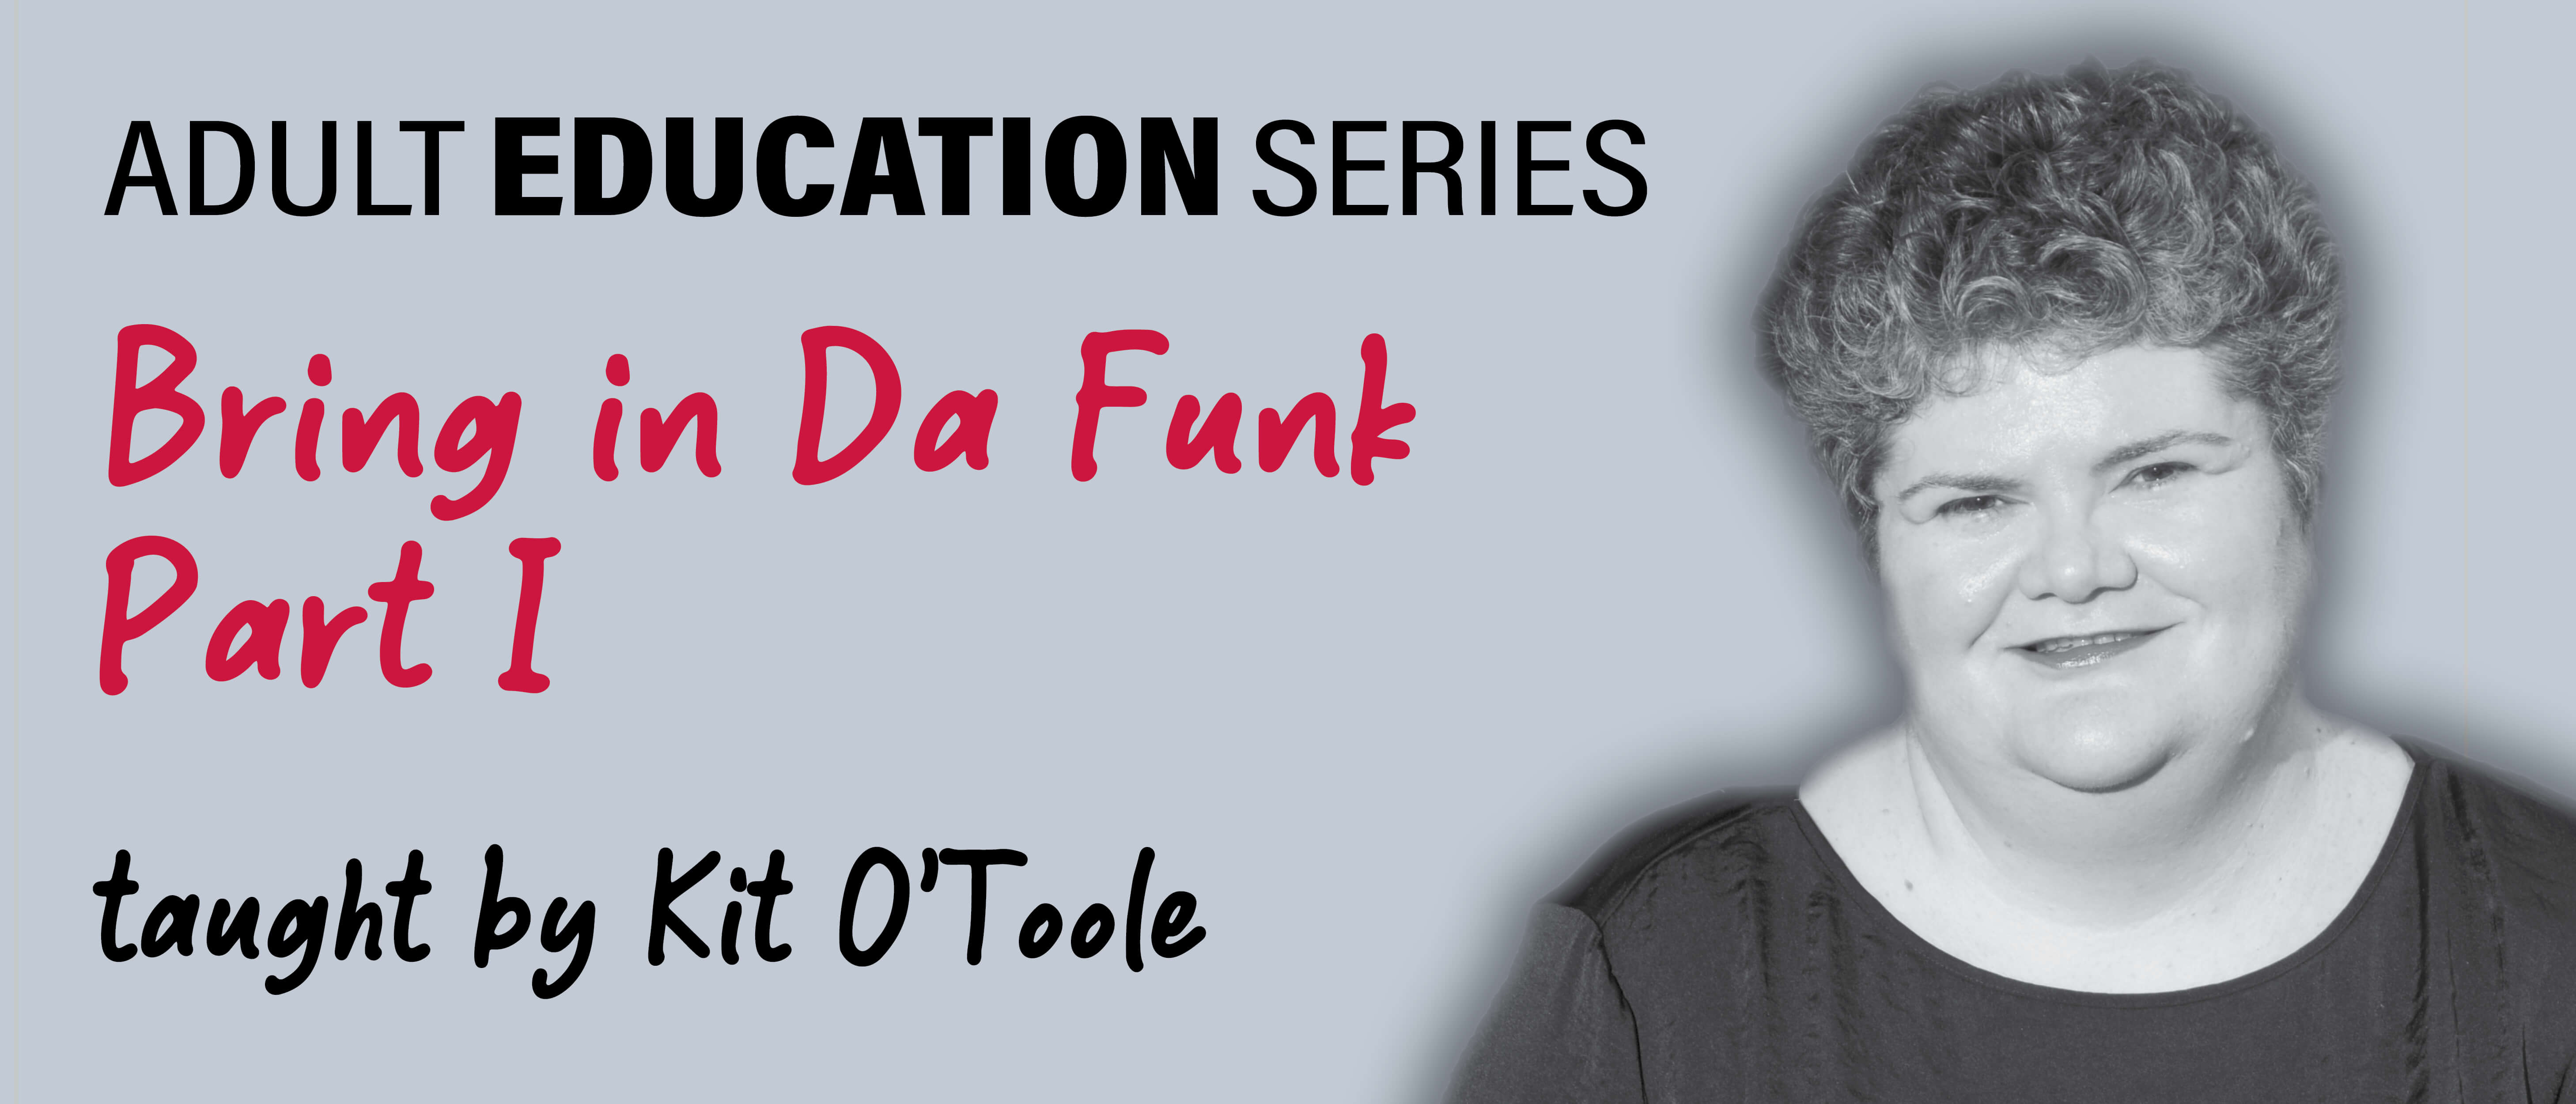 Adult Education Series: Bring in Da Funk, Part I taught by Kit O'Toole